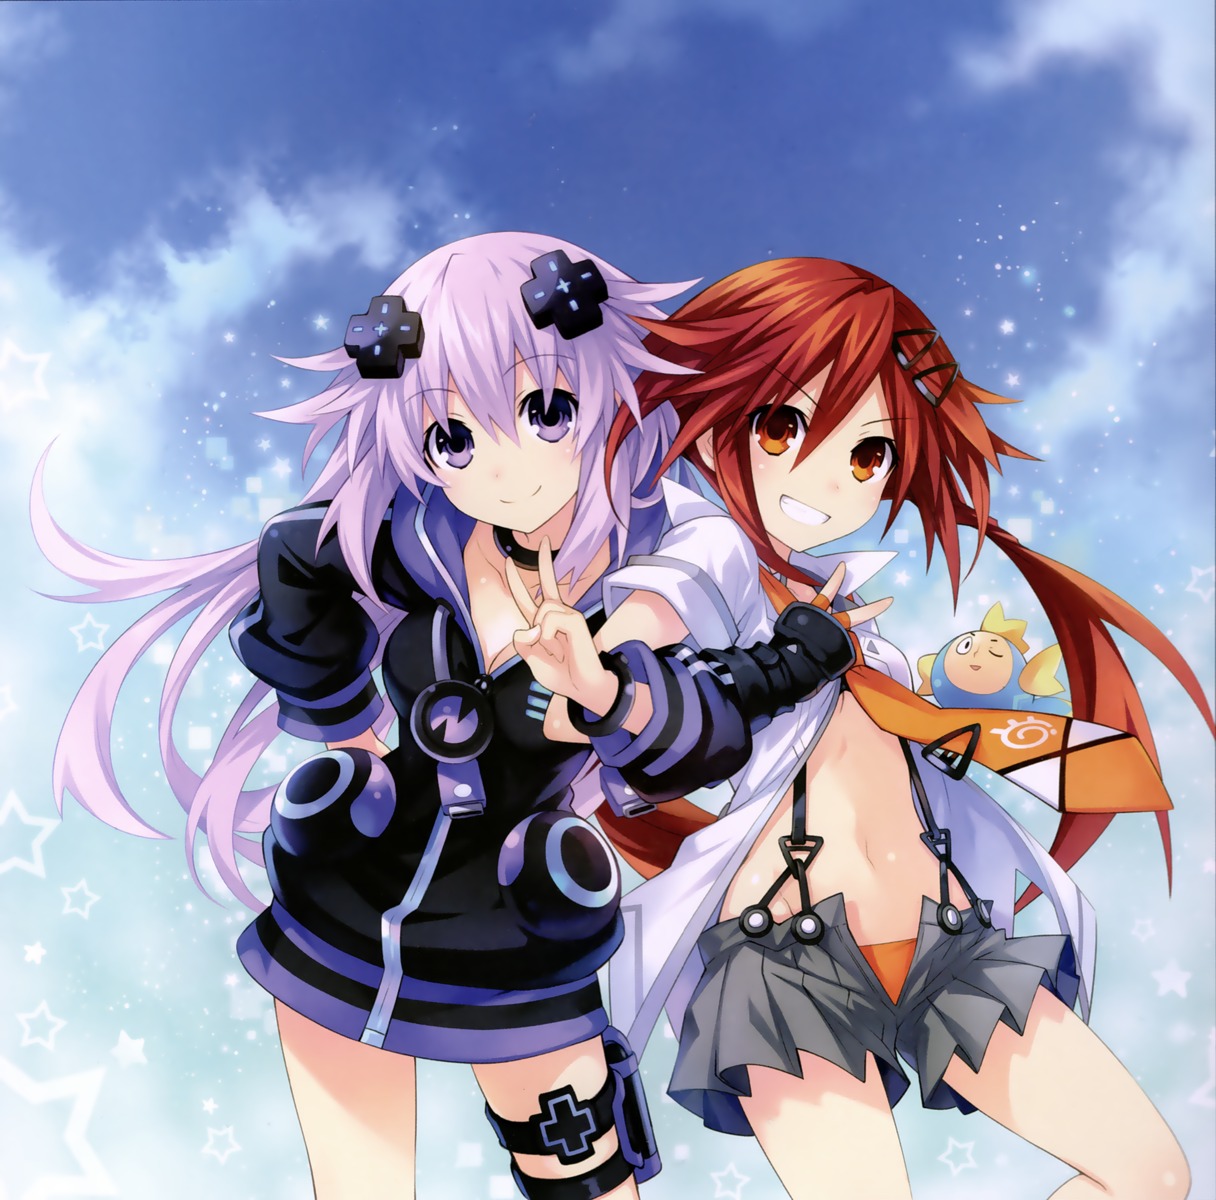 choujigen_game_neptune cleavage compile_heart dress neptune neptune_(shinjigen_game_neptune_vii) no_bra shinjigen_game_neptune_vii tennouboshi_uzume tsunako umio_(choujigen_game_neptune) underboob